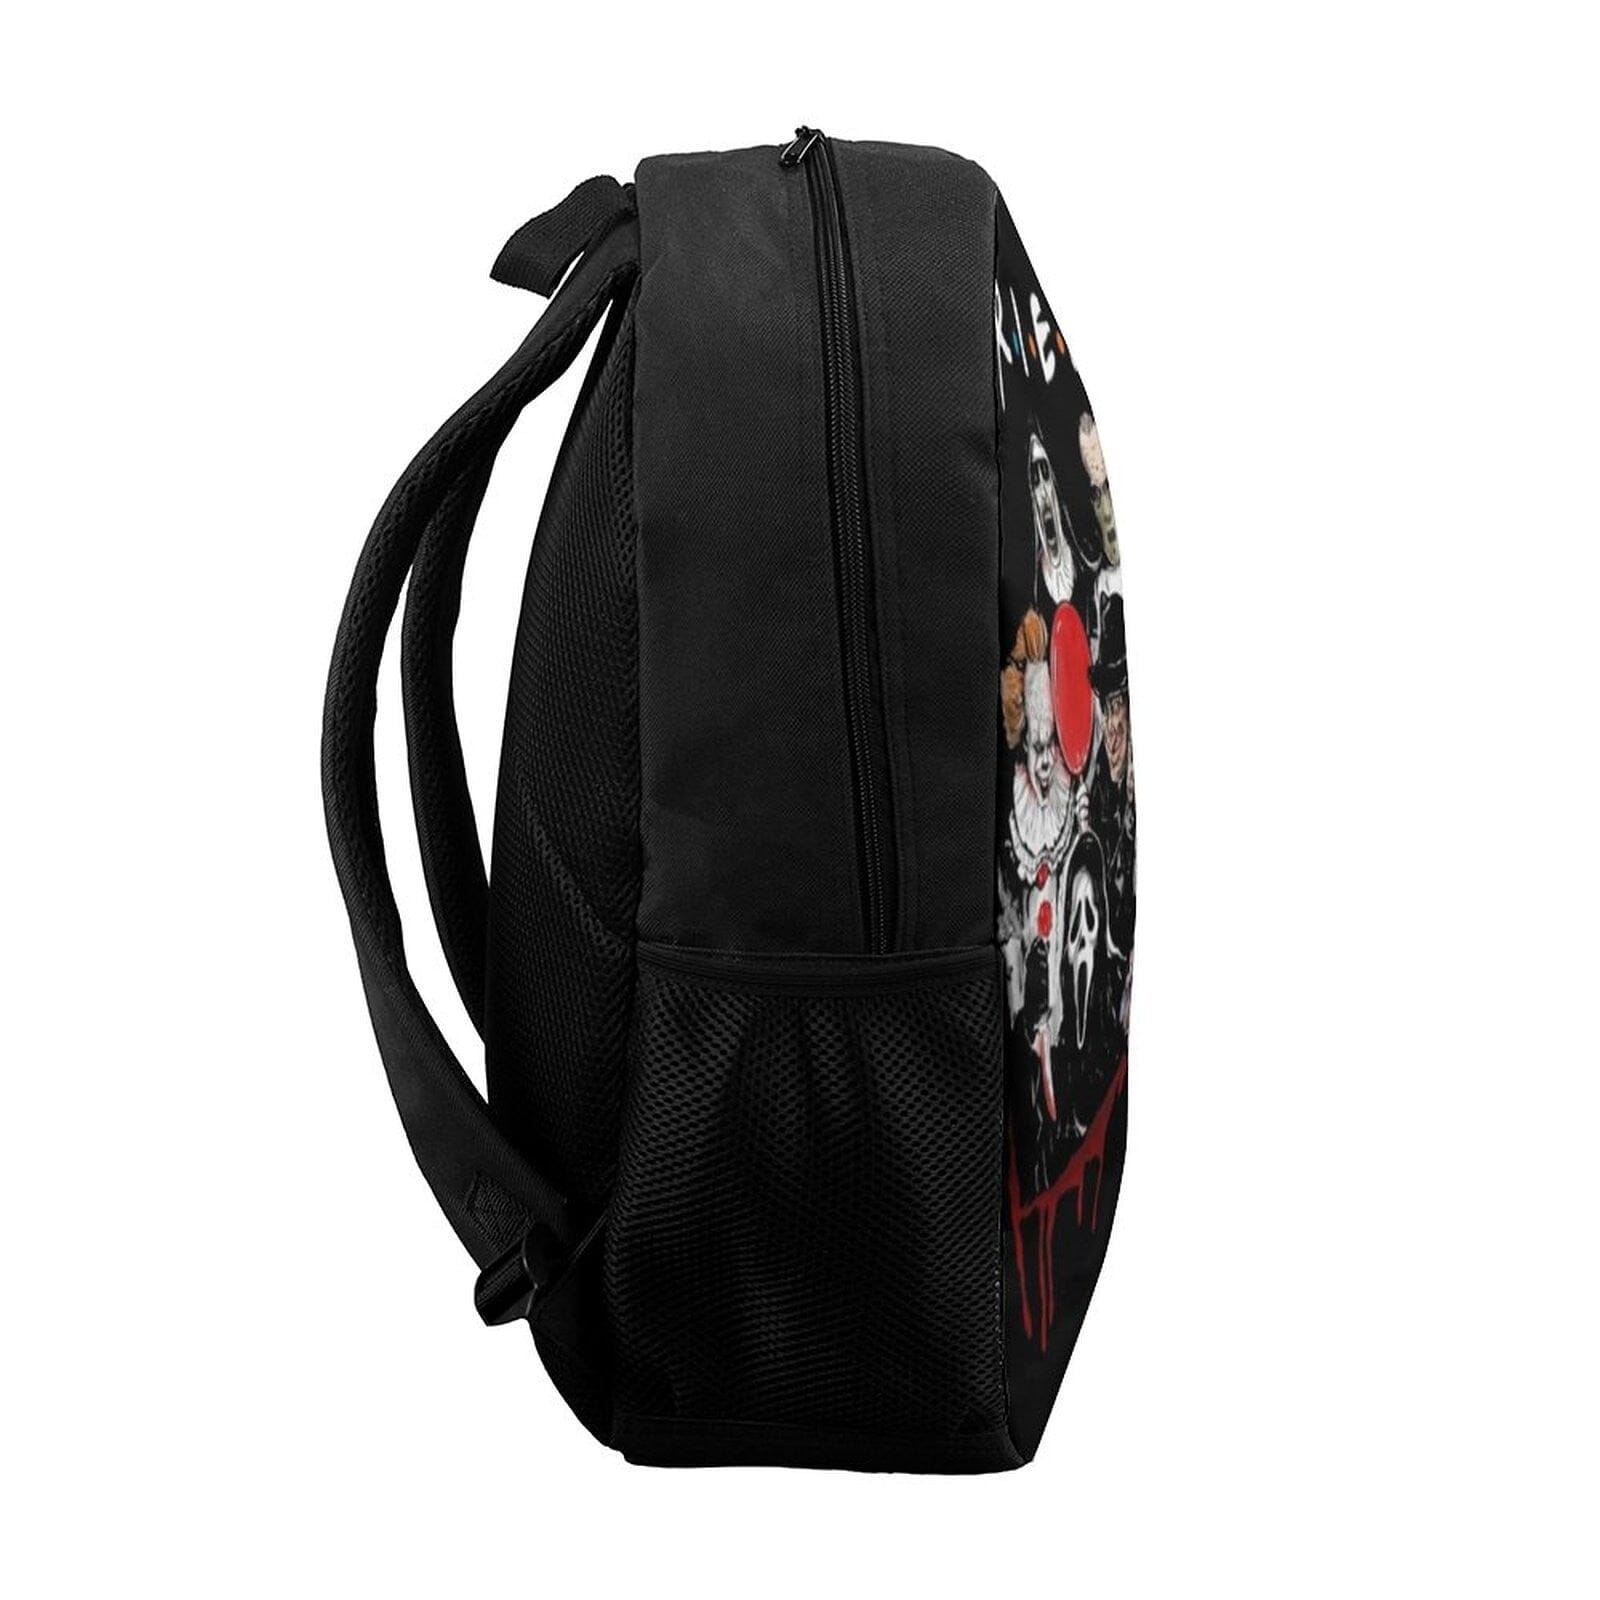 Horror Movie Mini Backpack The Store Bags 